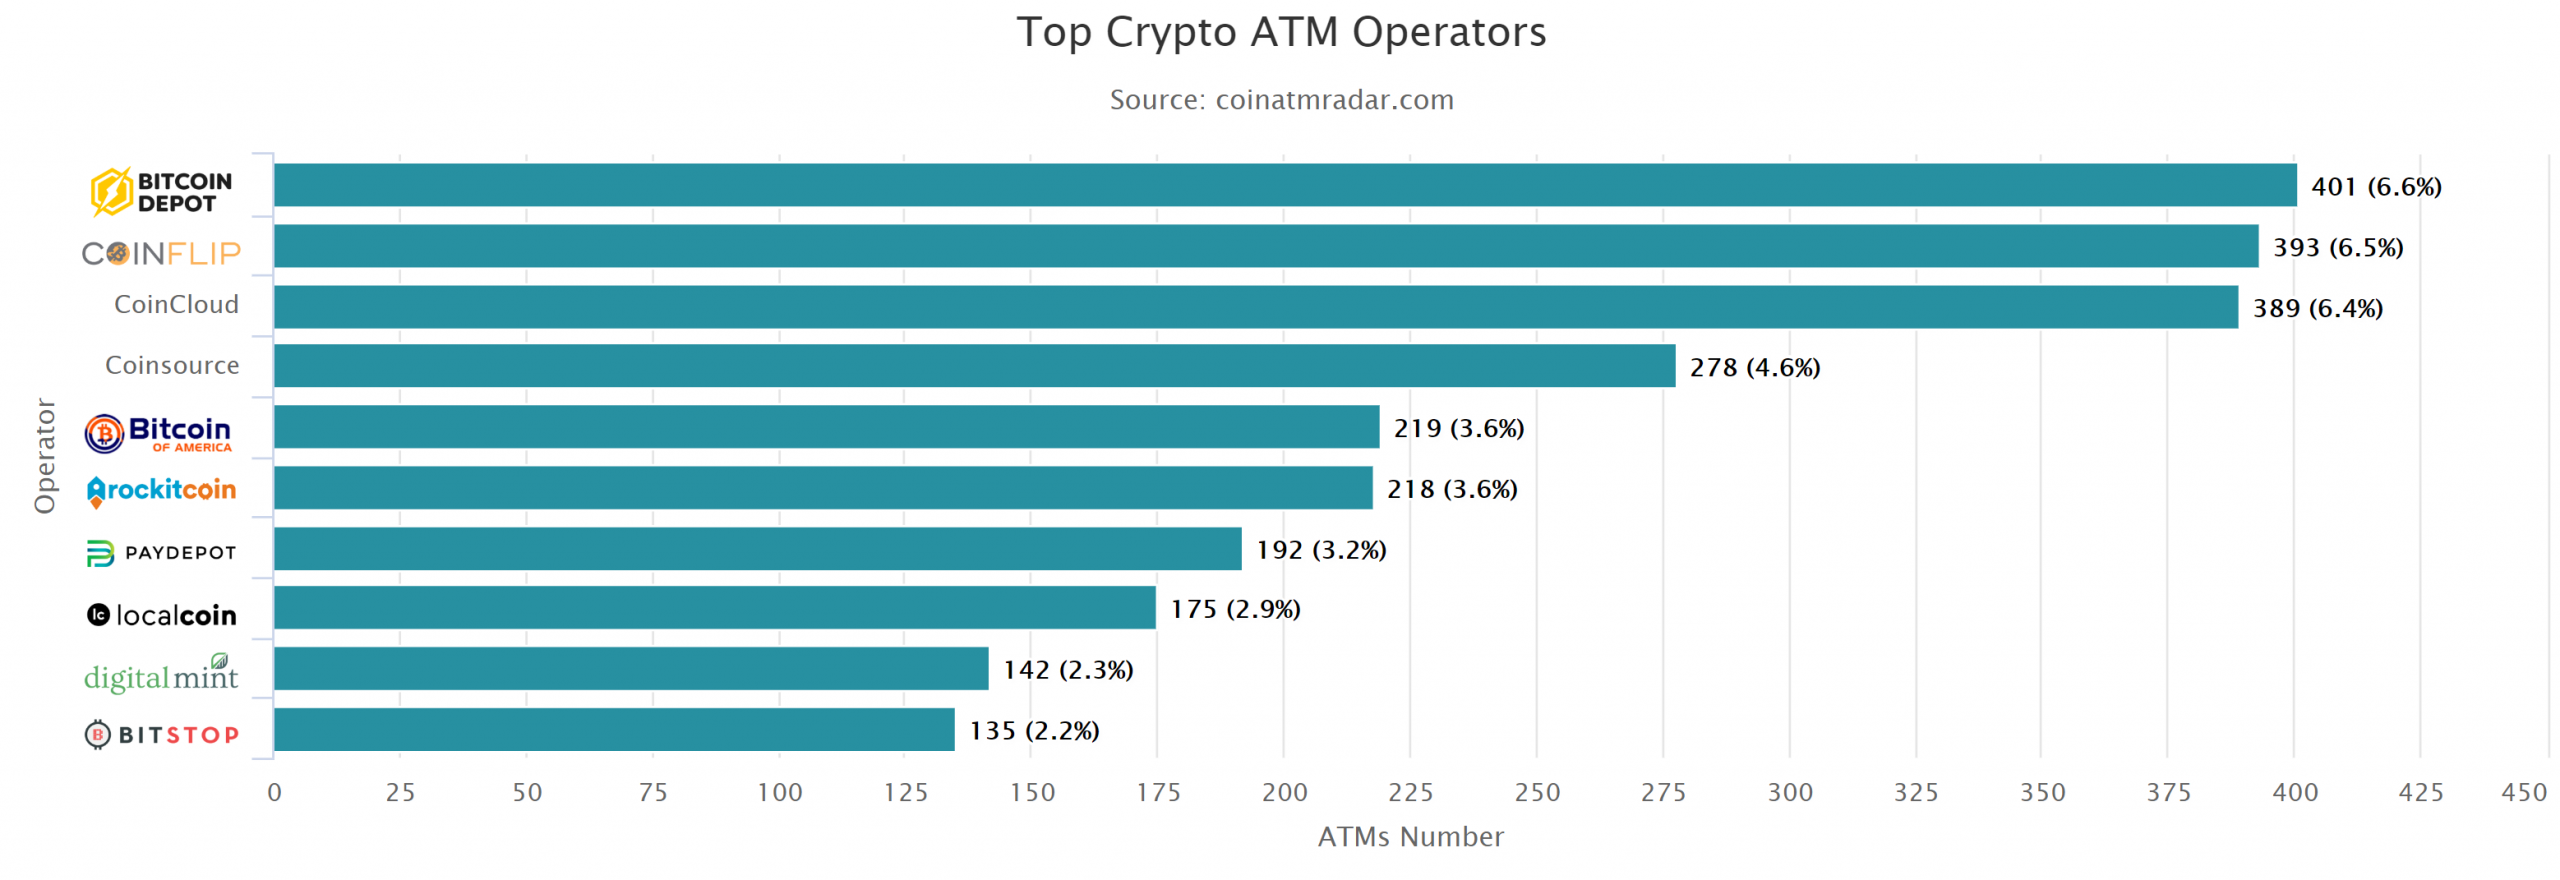 Leading Bitcoin ATM producers worldwide | Statista